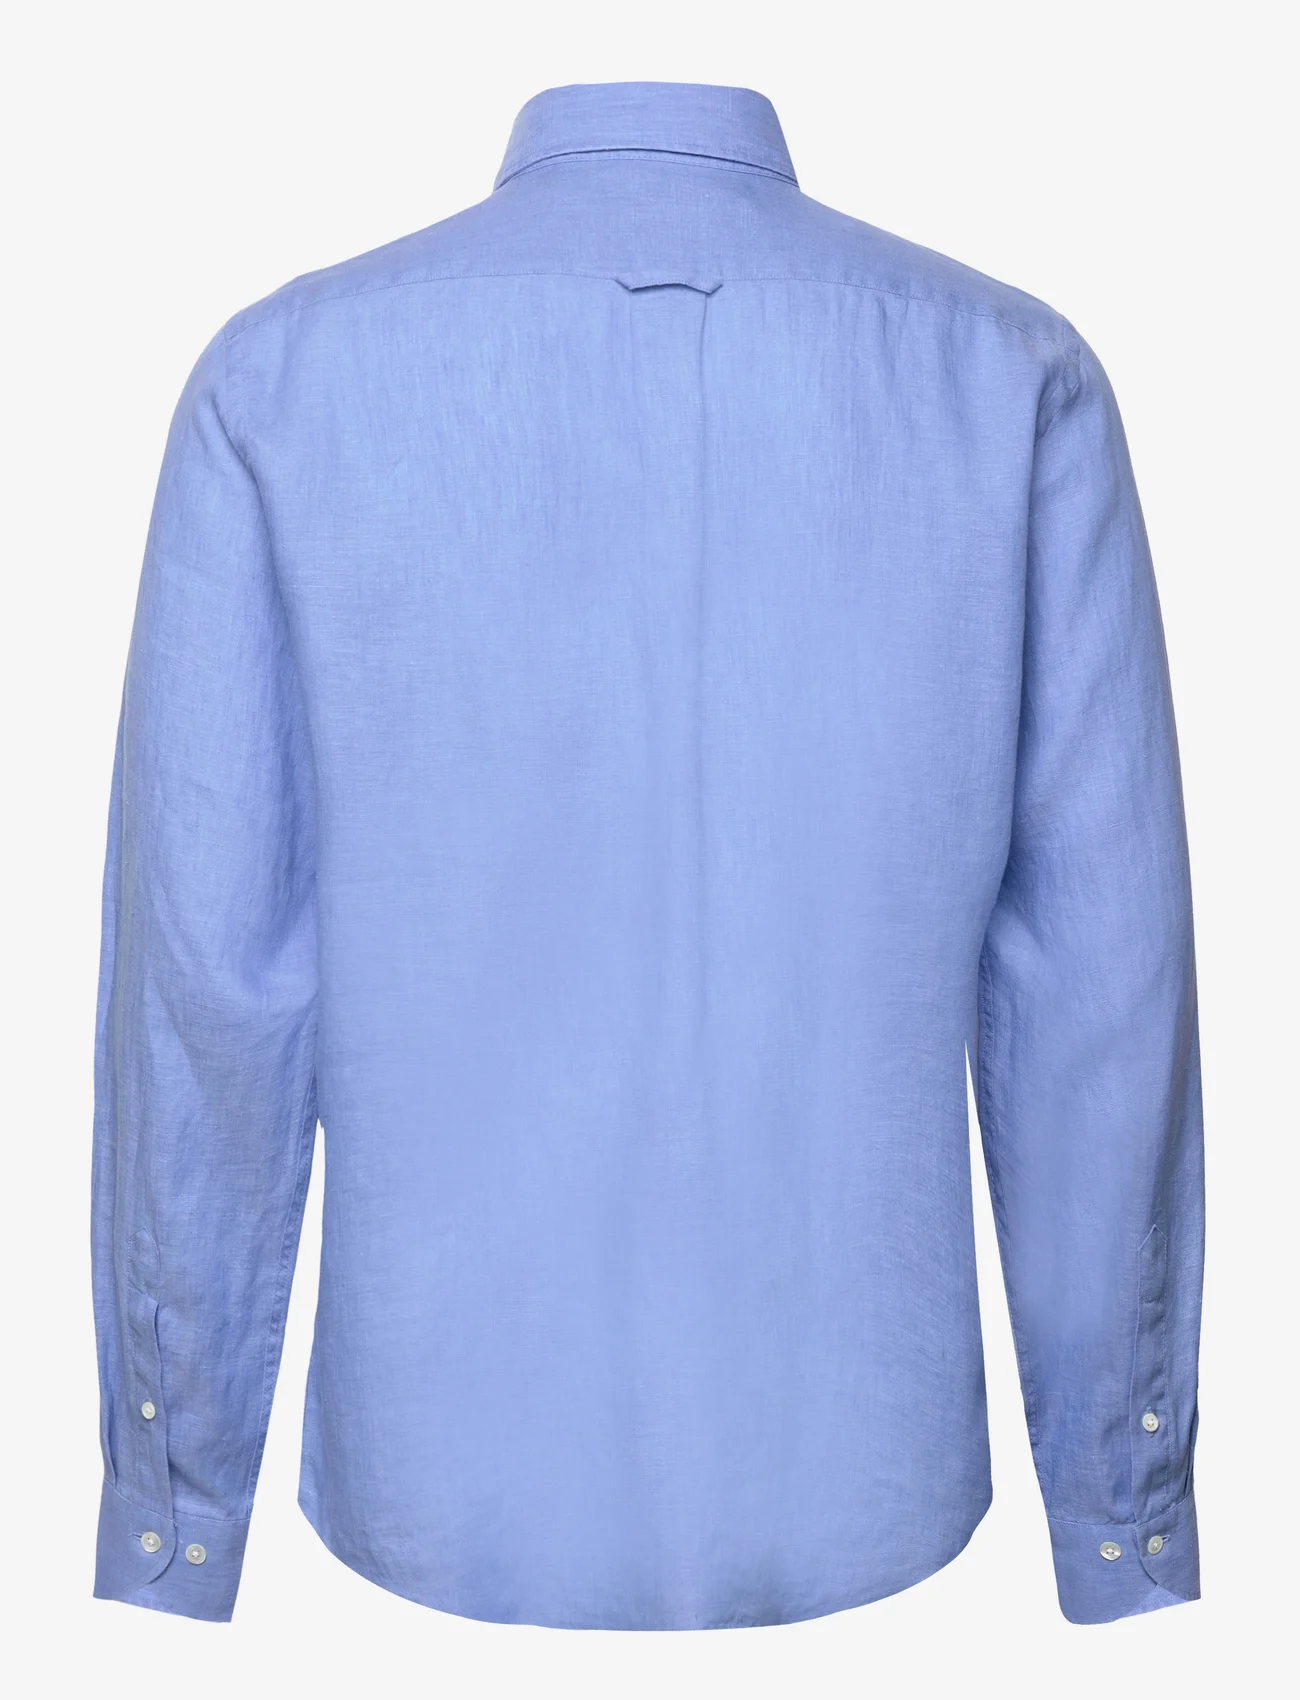 SIR of Sweden - Jerry Shirt - nordic style - blue - 1